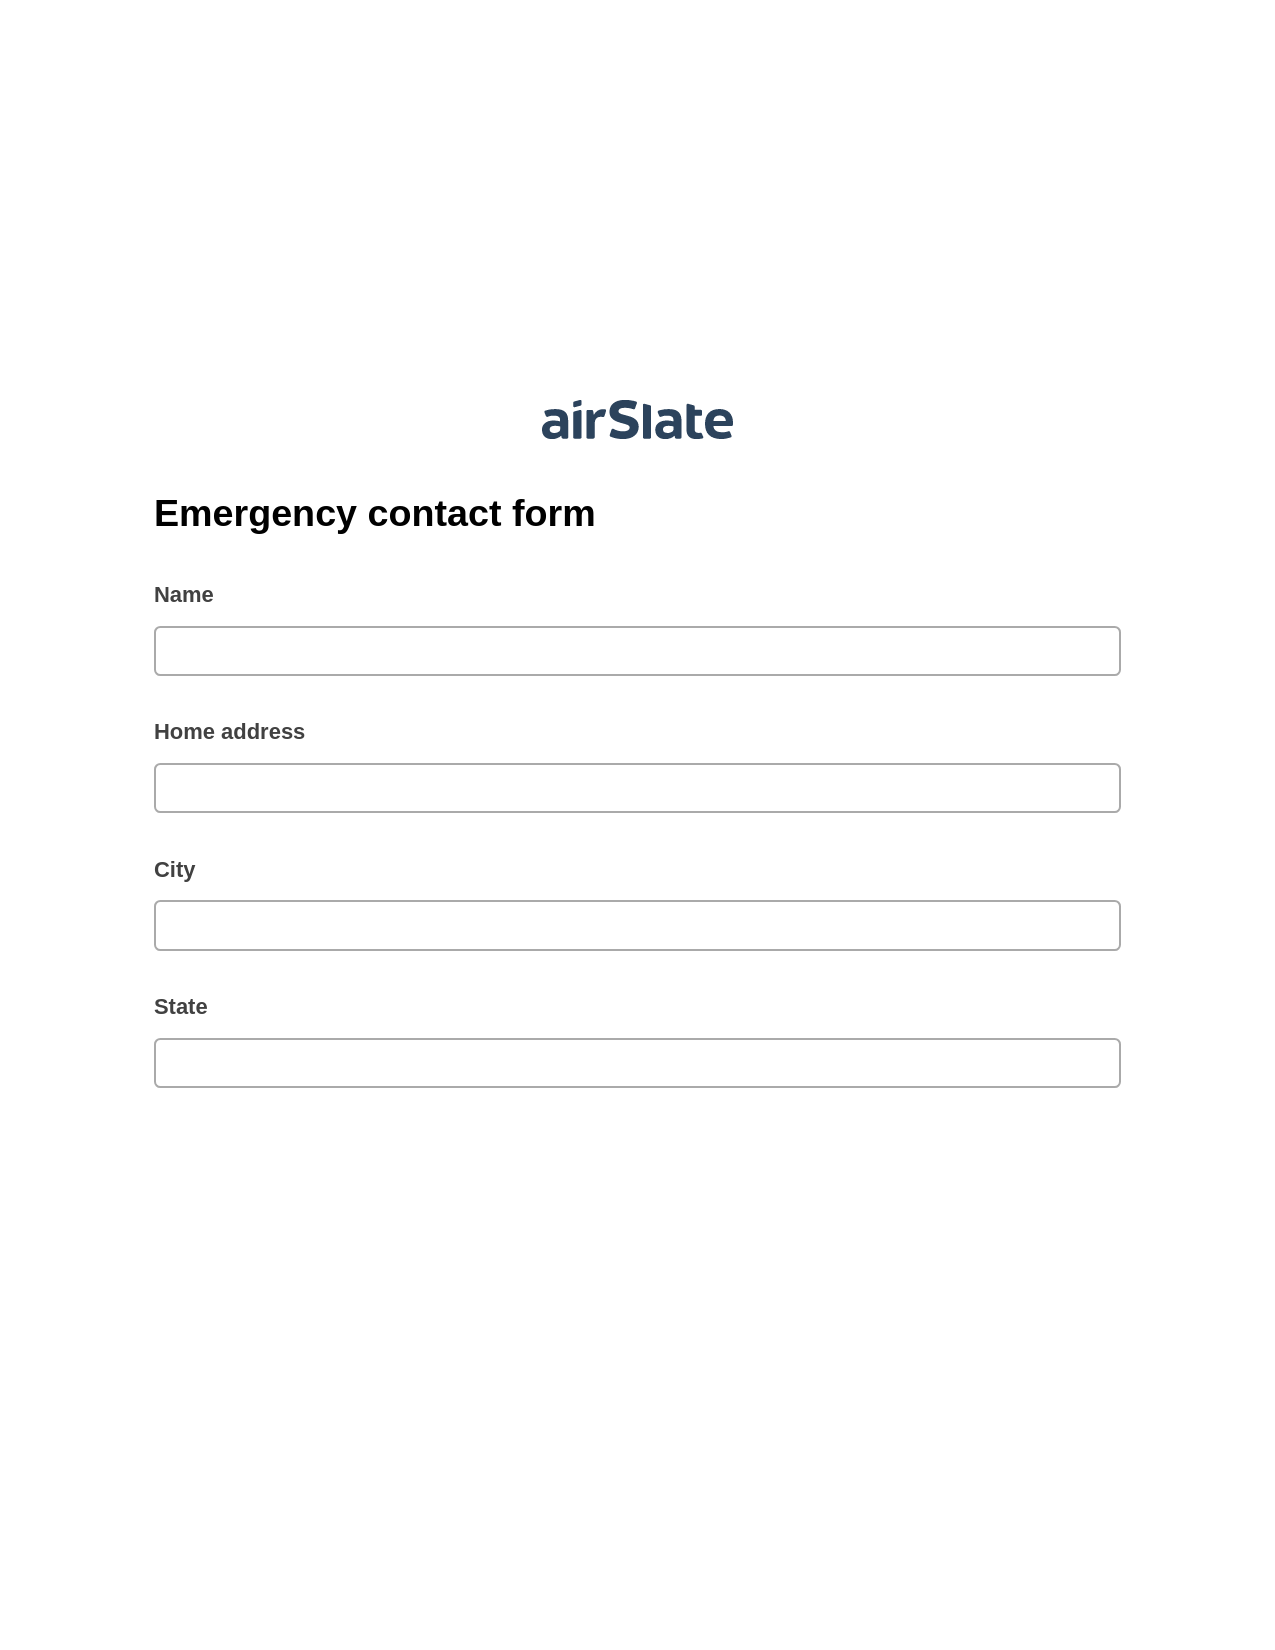 Multirole Emergency contact form Pre-fill Dropdown from Airtable, Update MS Dynamics 365 Records Bot, Post-finish Document Bot